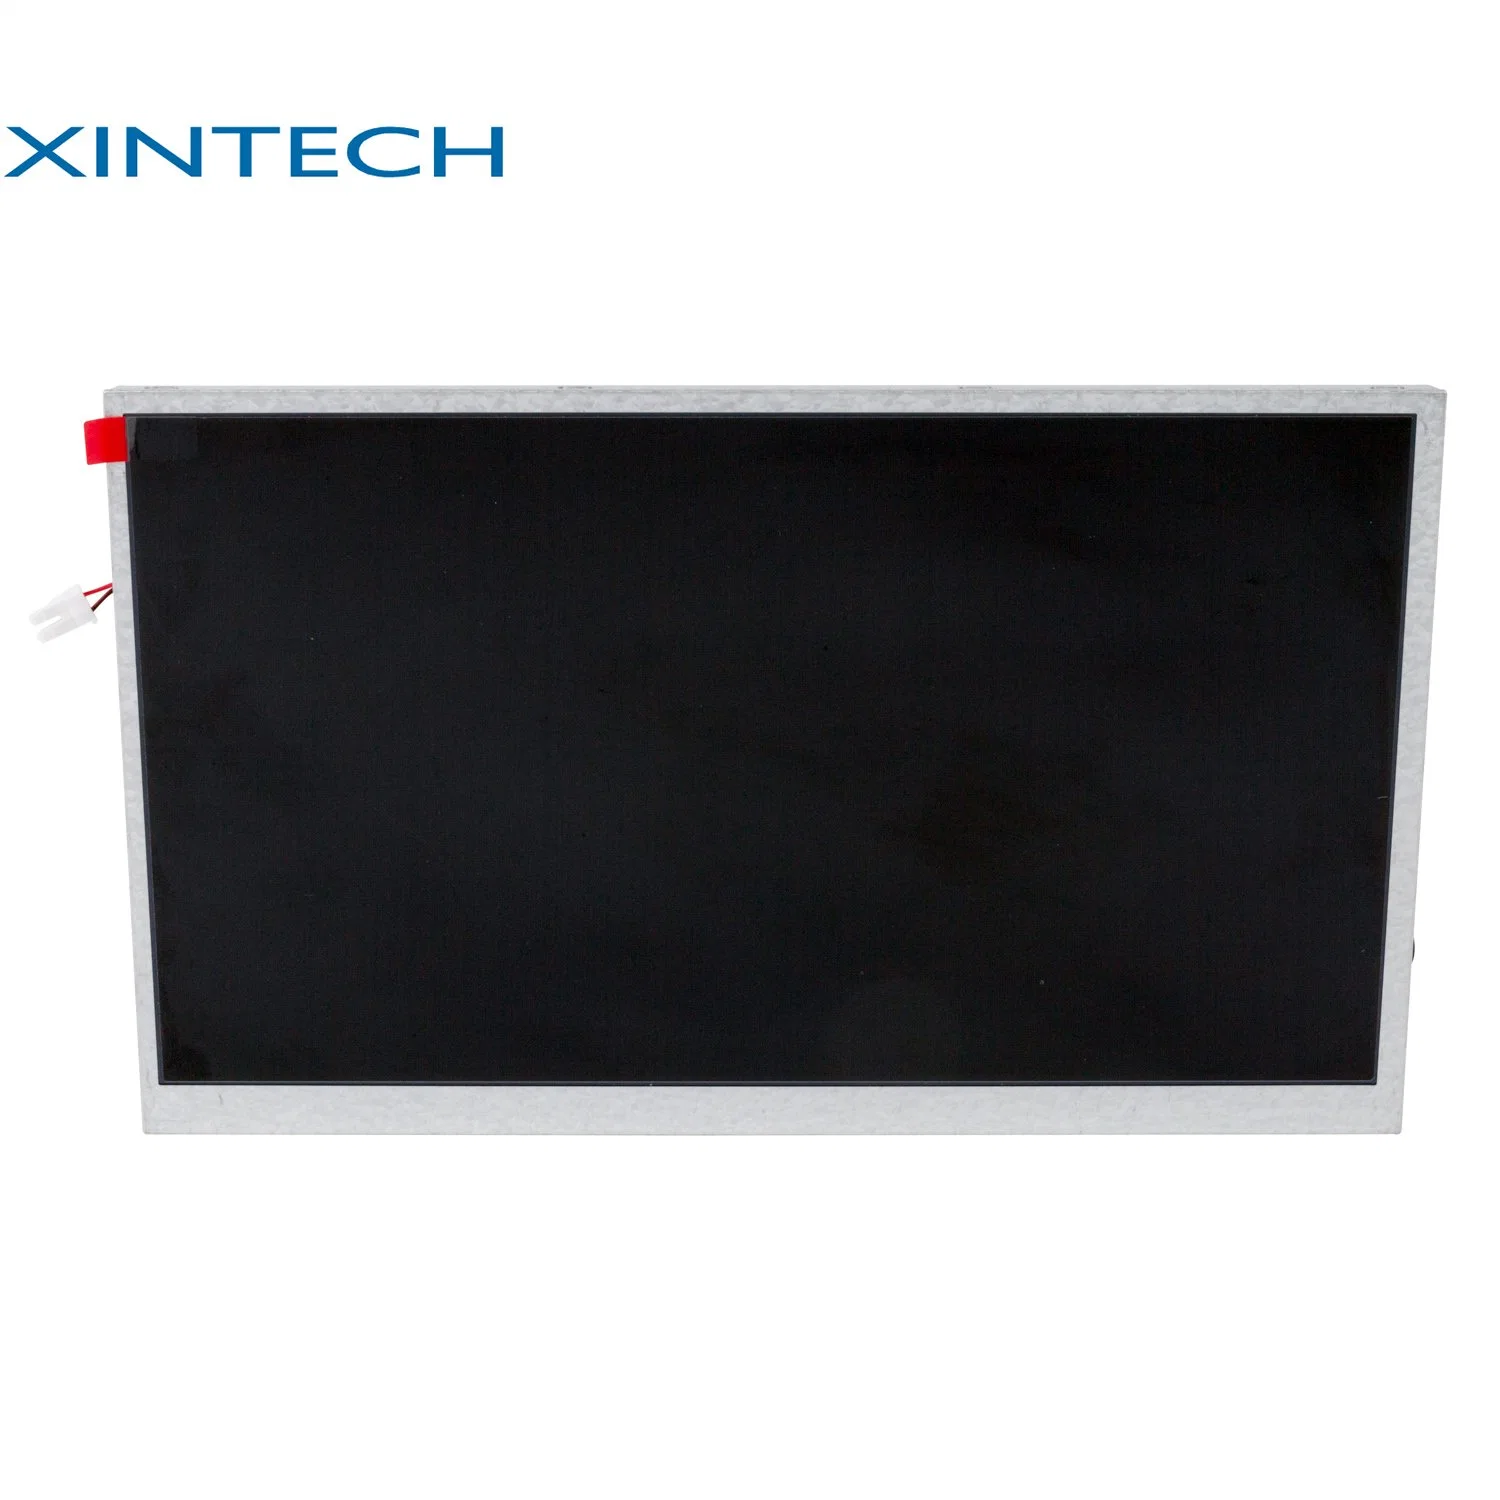 8.4inch TFT LCD Display Module for Industrial Use